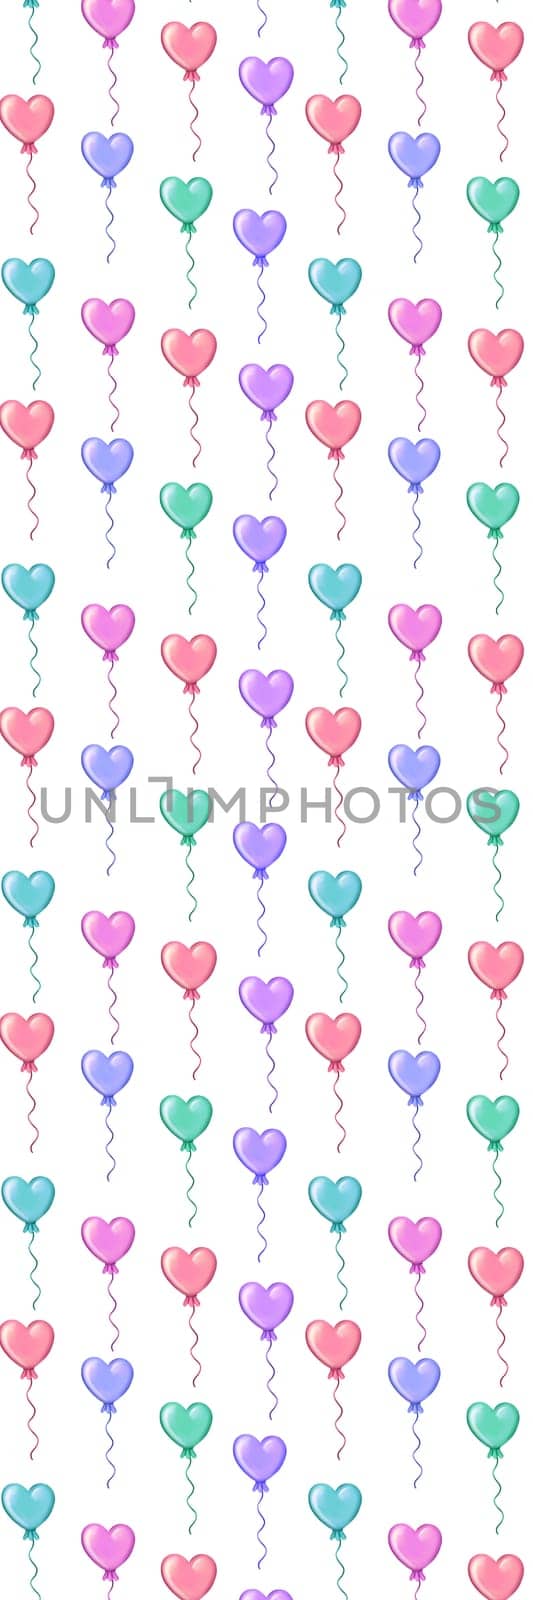 White Blue Pink Heart Air balloons pattern Bookmark - 1 by Dustick